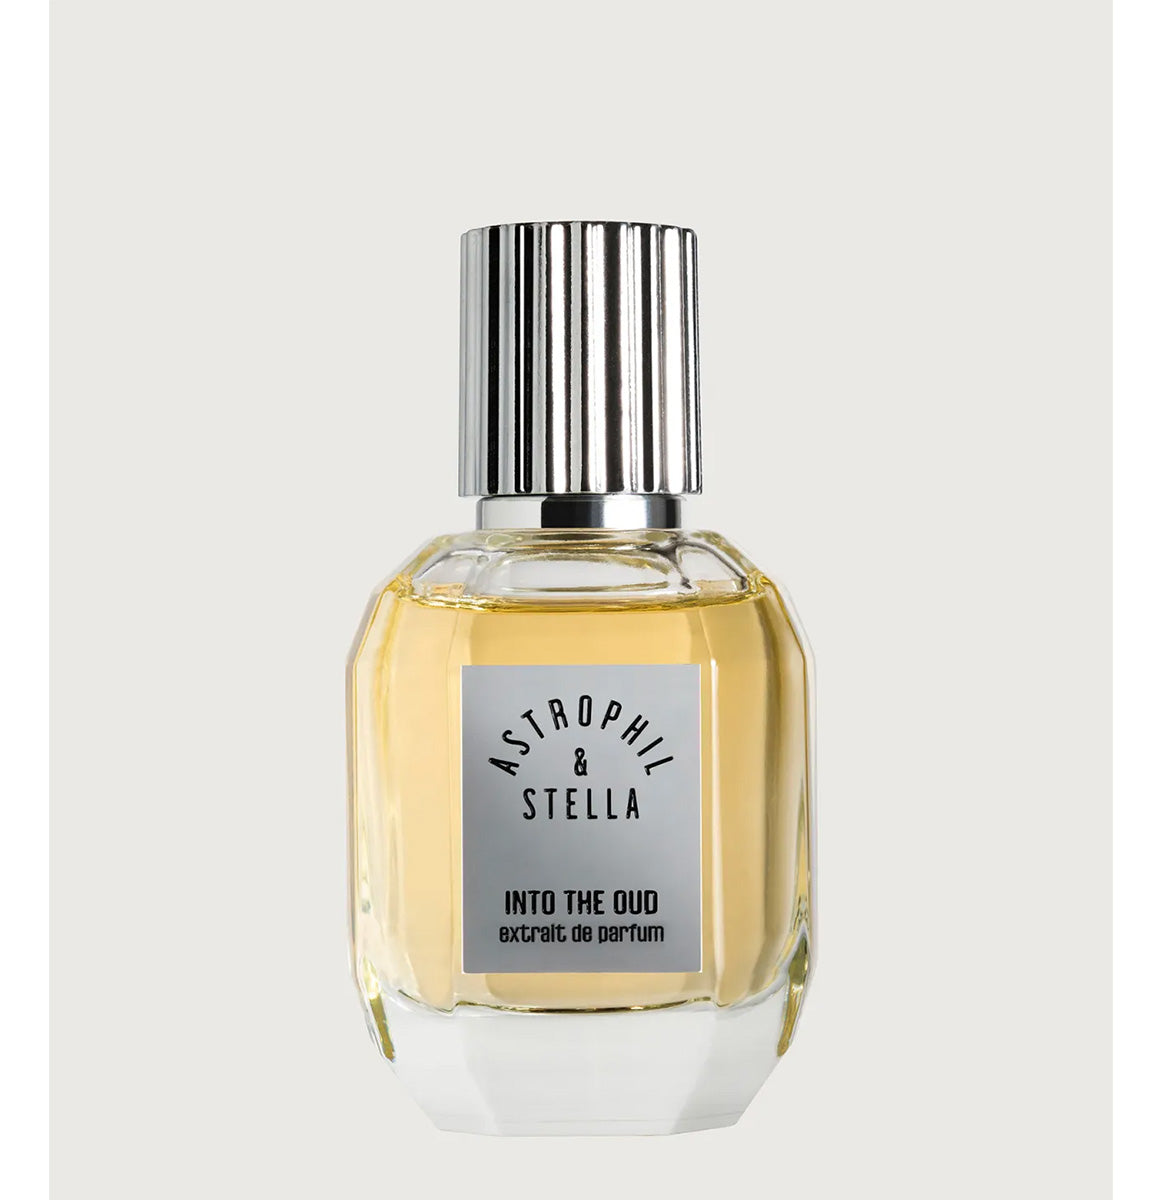 Into the Oud by Astrophil & Stella at Indigo Perfumery